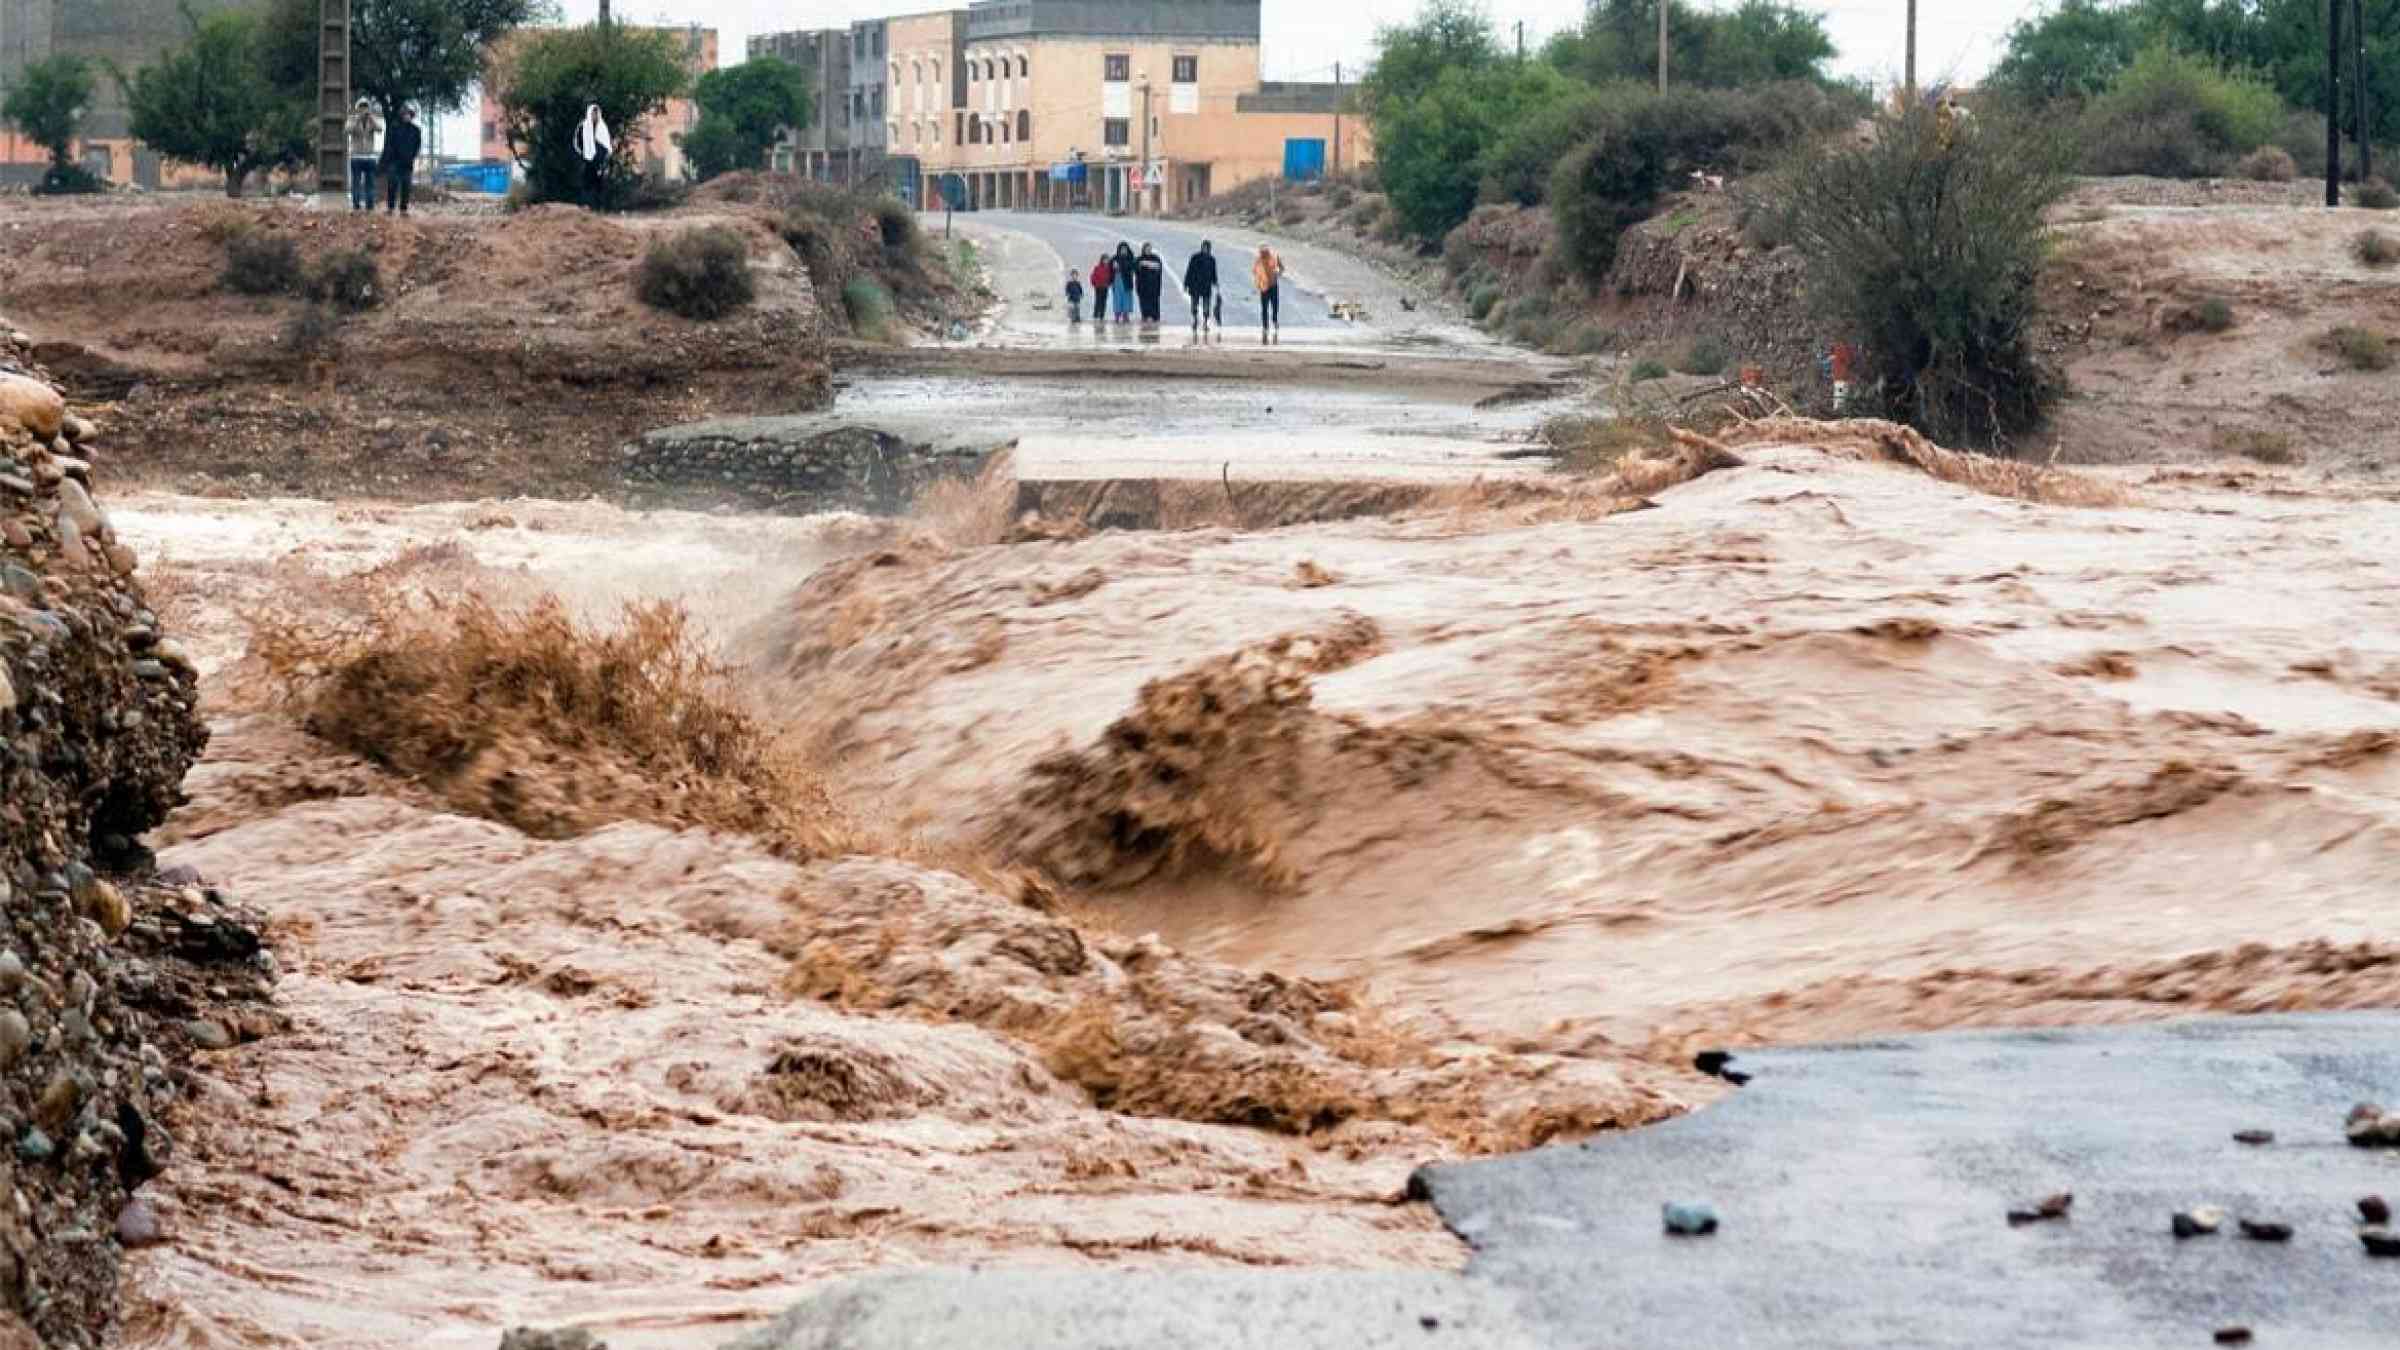 A road is destroyed by flash flooding in Sidi Ouaaziz, Morocco